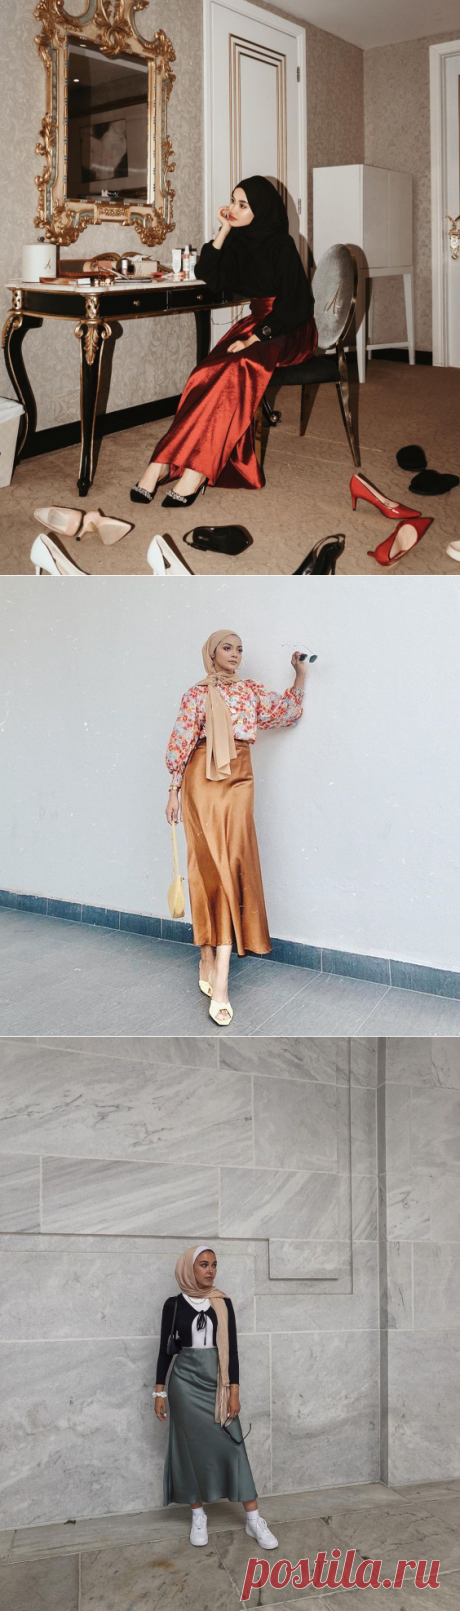 Flawless Looks Hijab Style Inspirations With Satin Skirt - Hijab-style.com